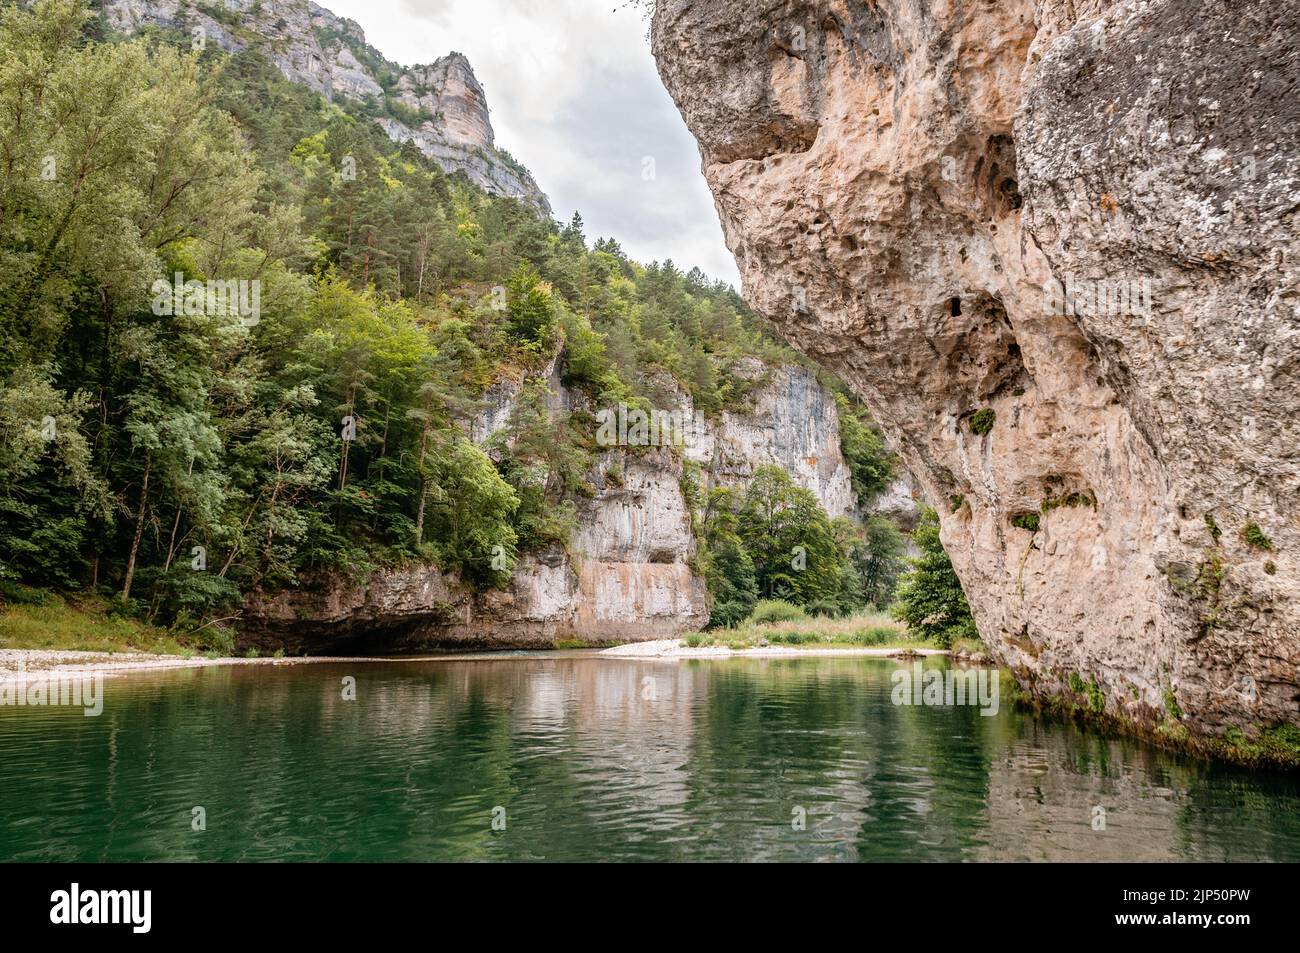 Cliffs and forest, Gorges du Tarn, Lozere, France Stock Photo